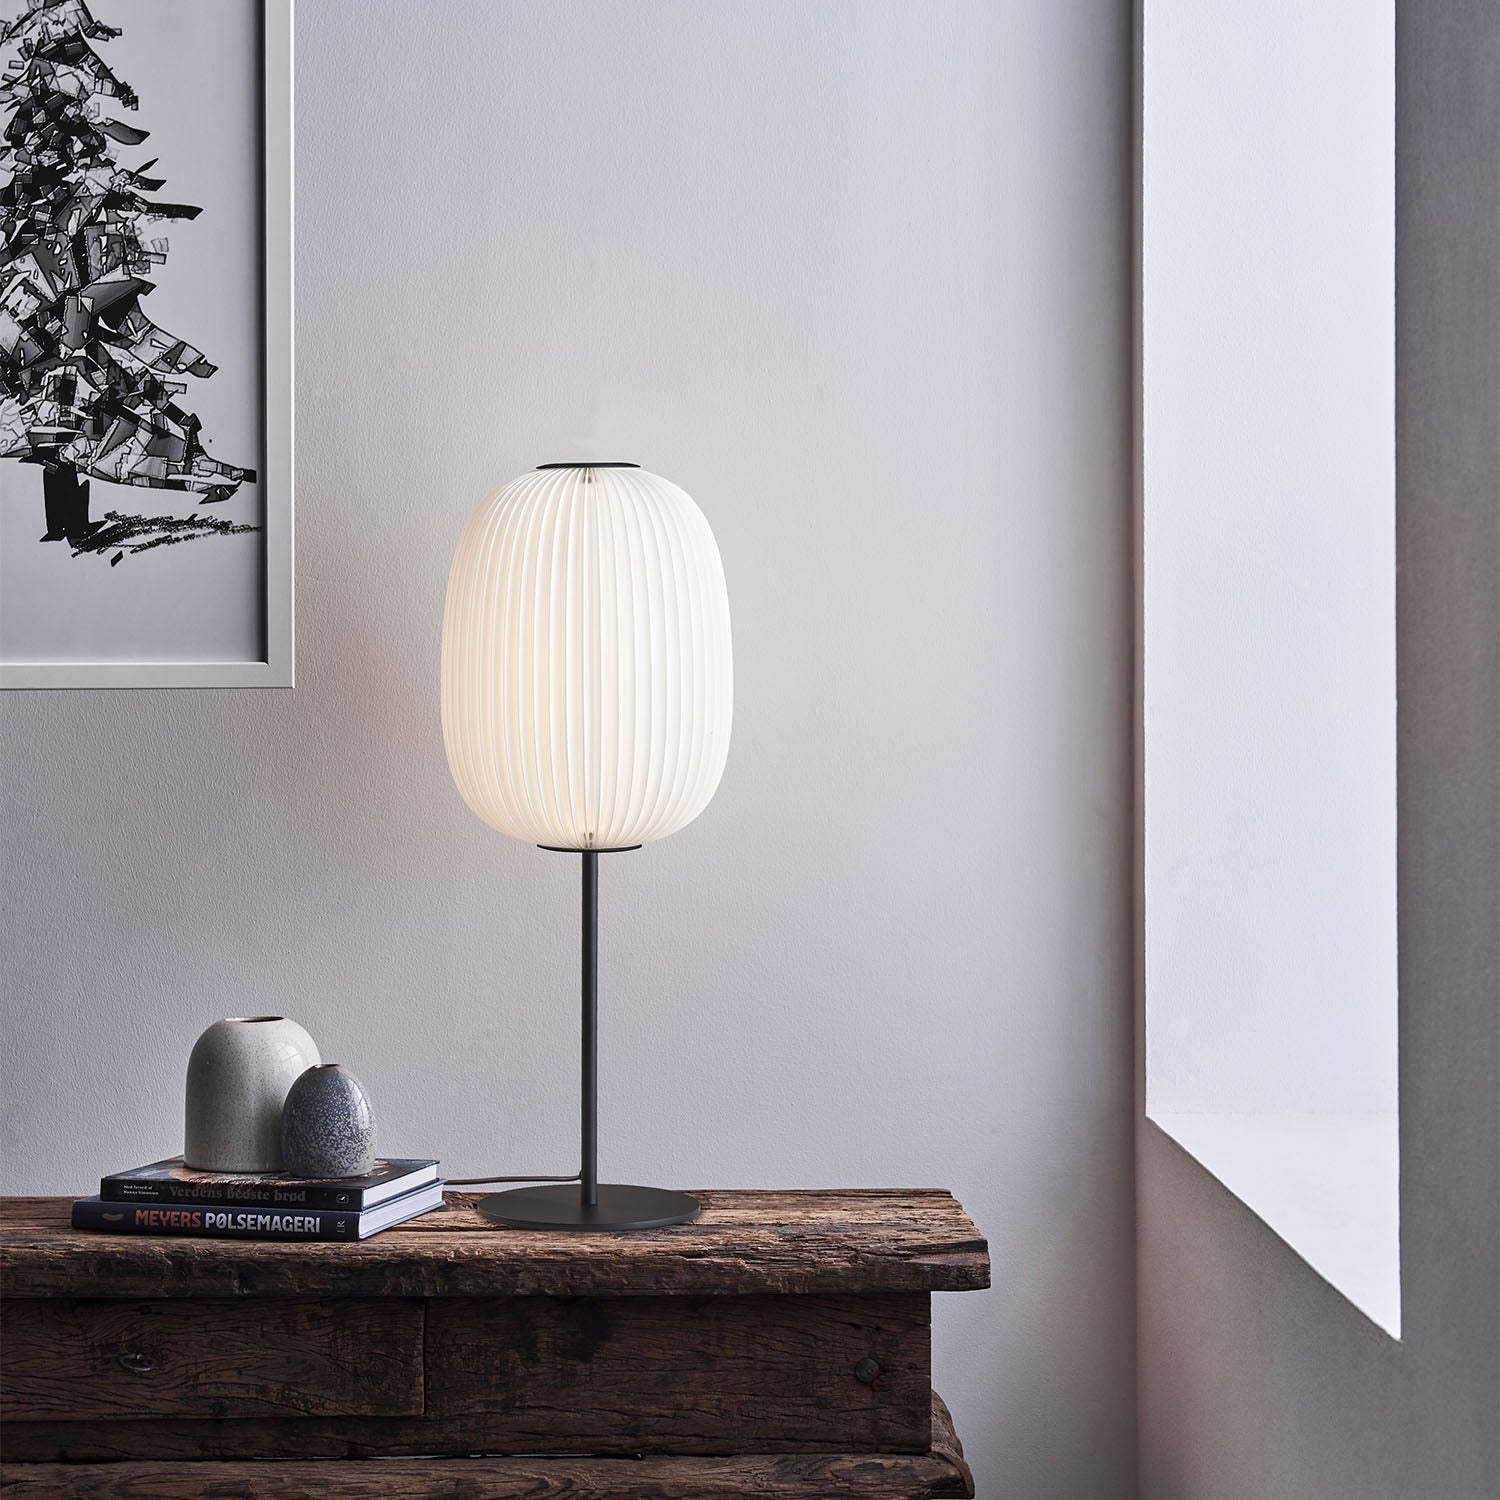 LAMELLA - Table lamp made by hand in pleated paper